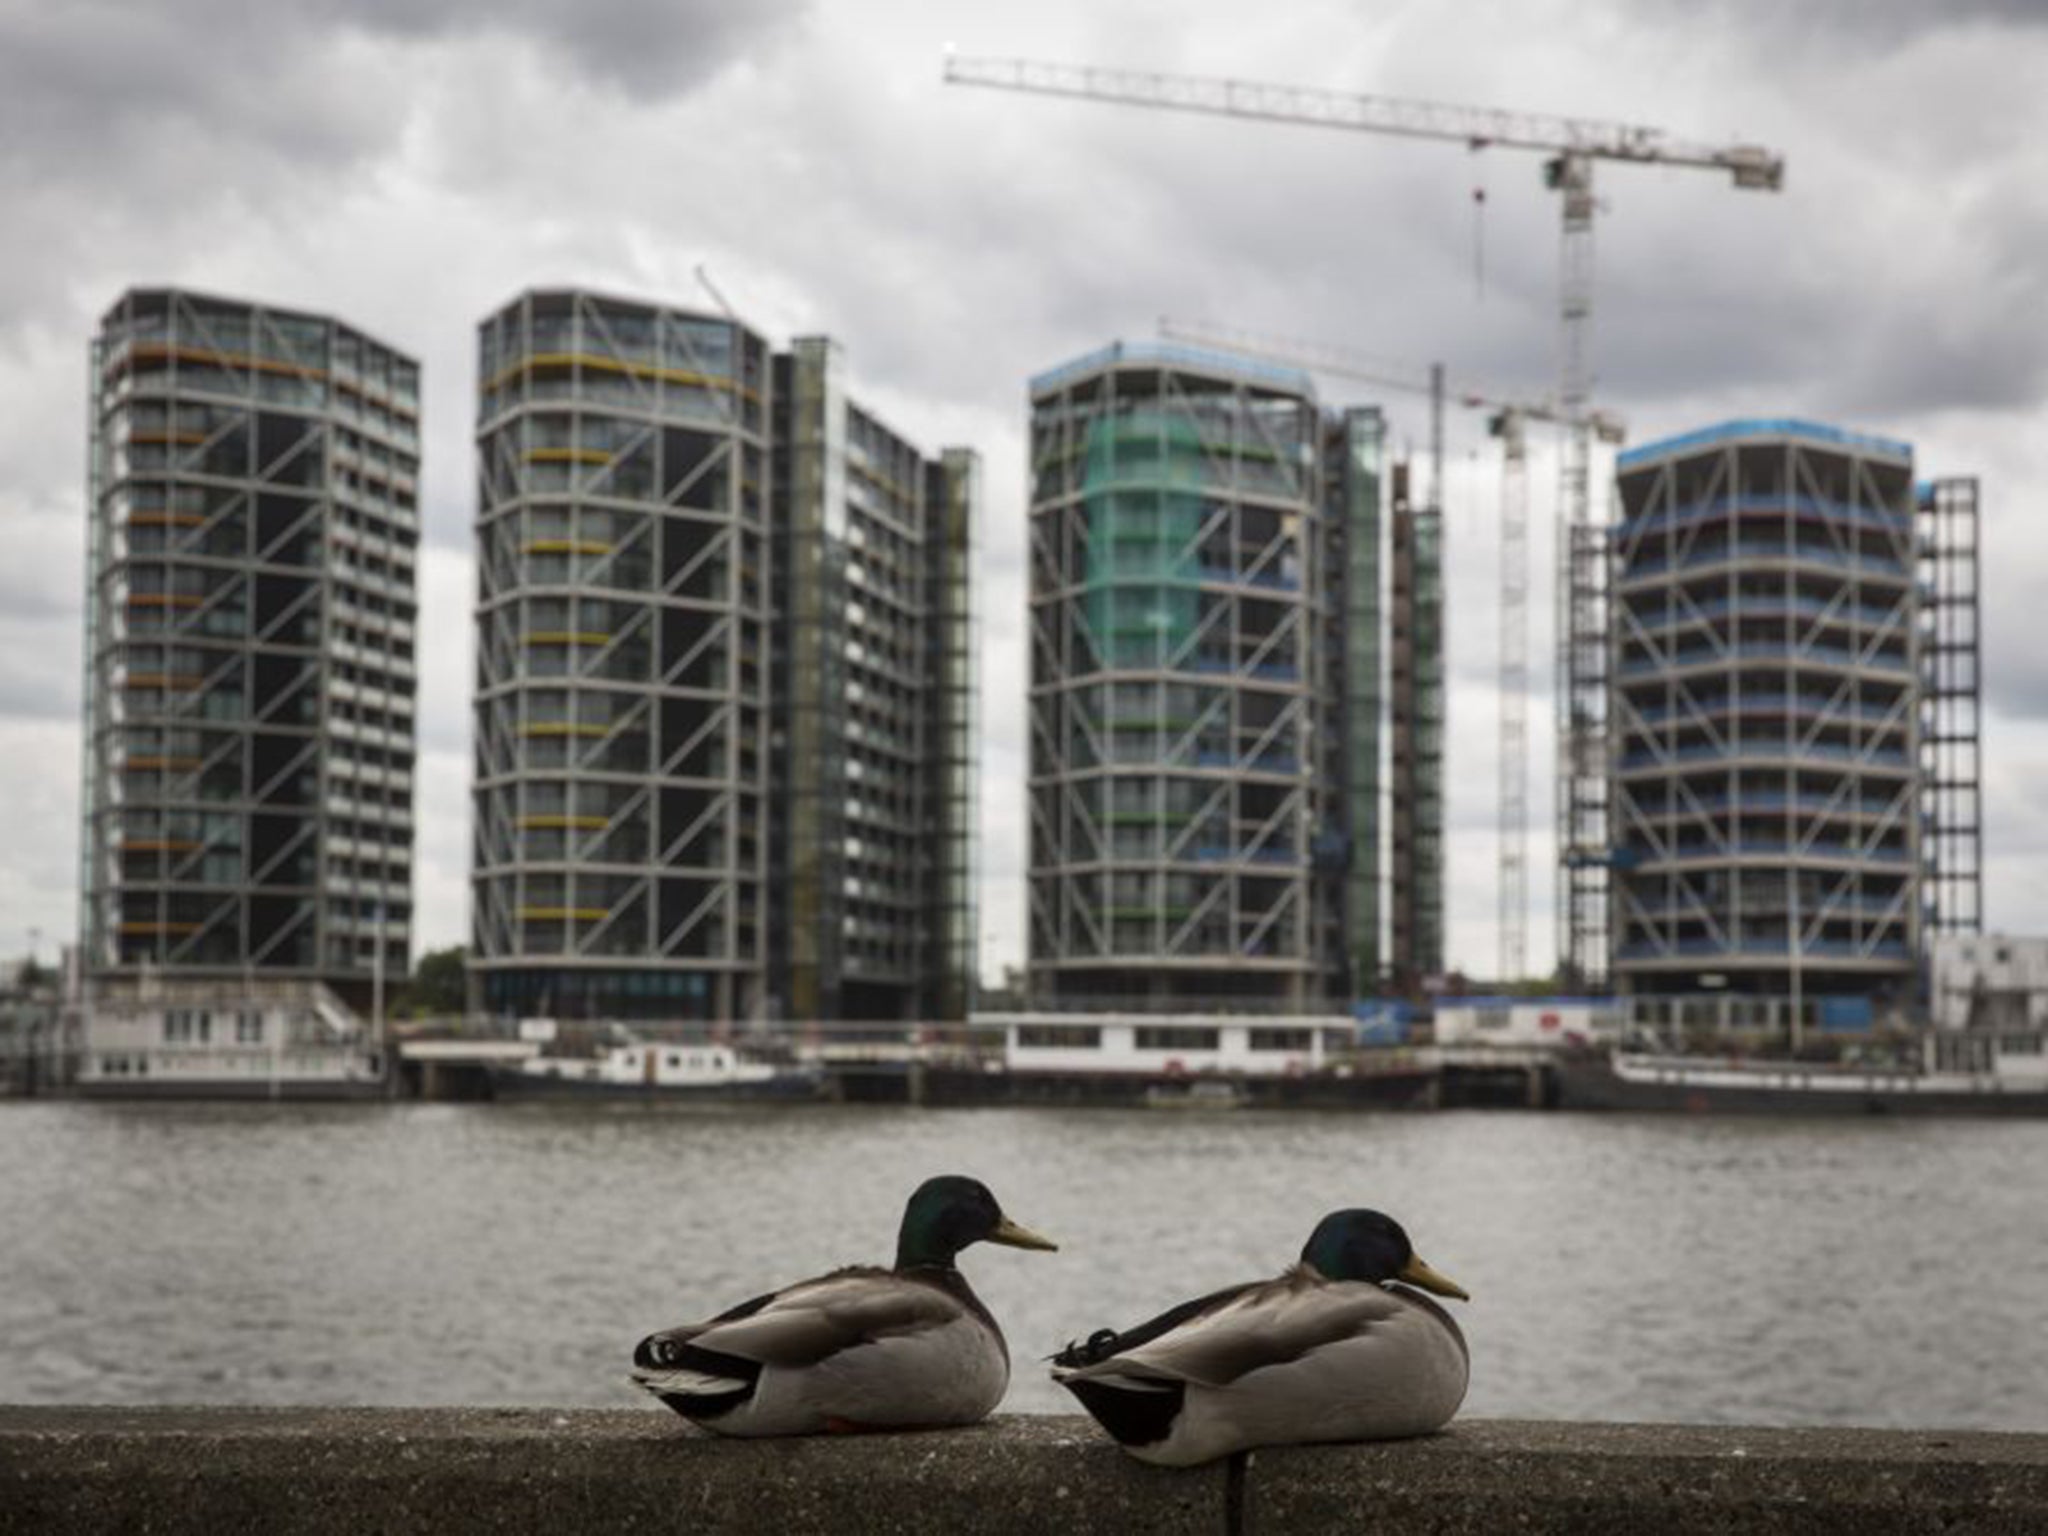 Luxury flats go up by the Thames. New figures show that property prices are booming, the average home in the capital is now worth £500,000 and the prices are being driven up